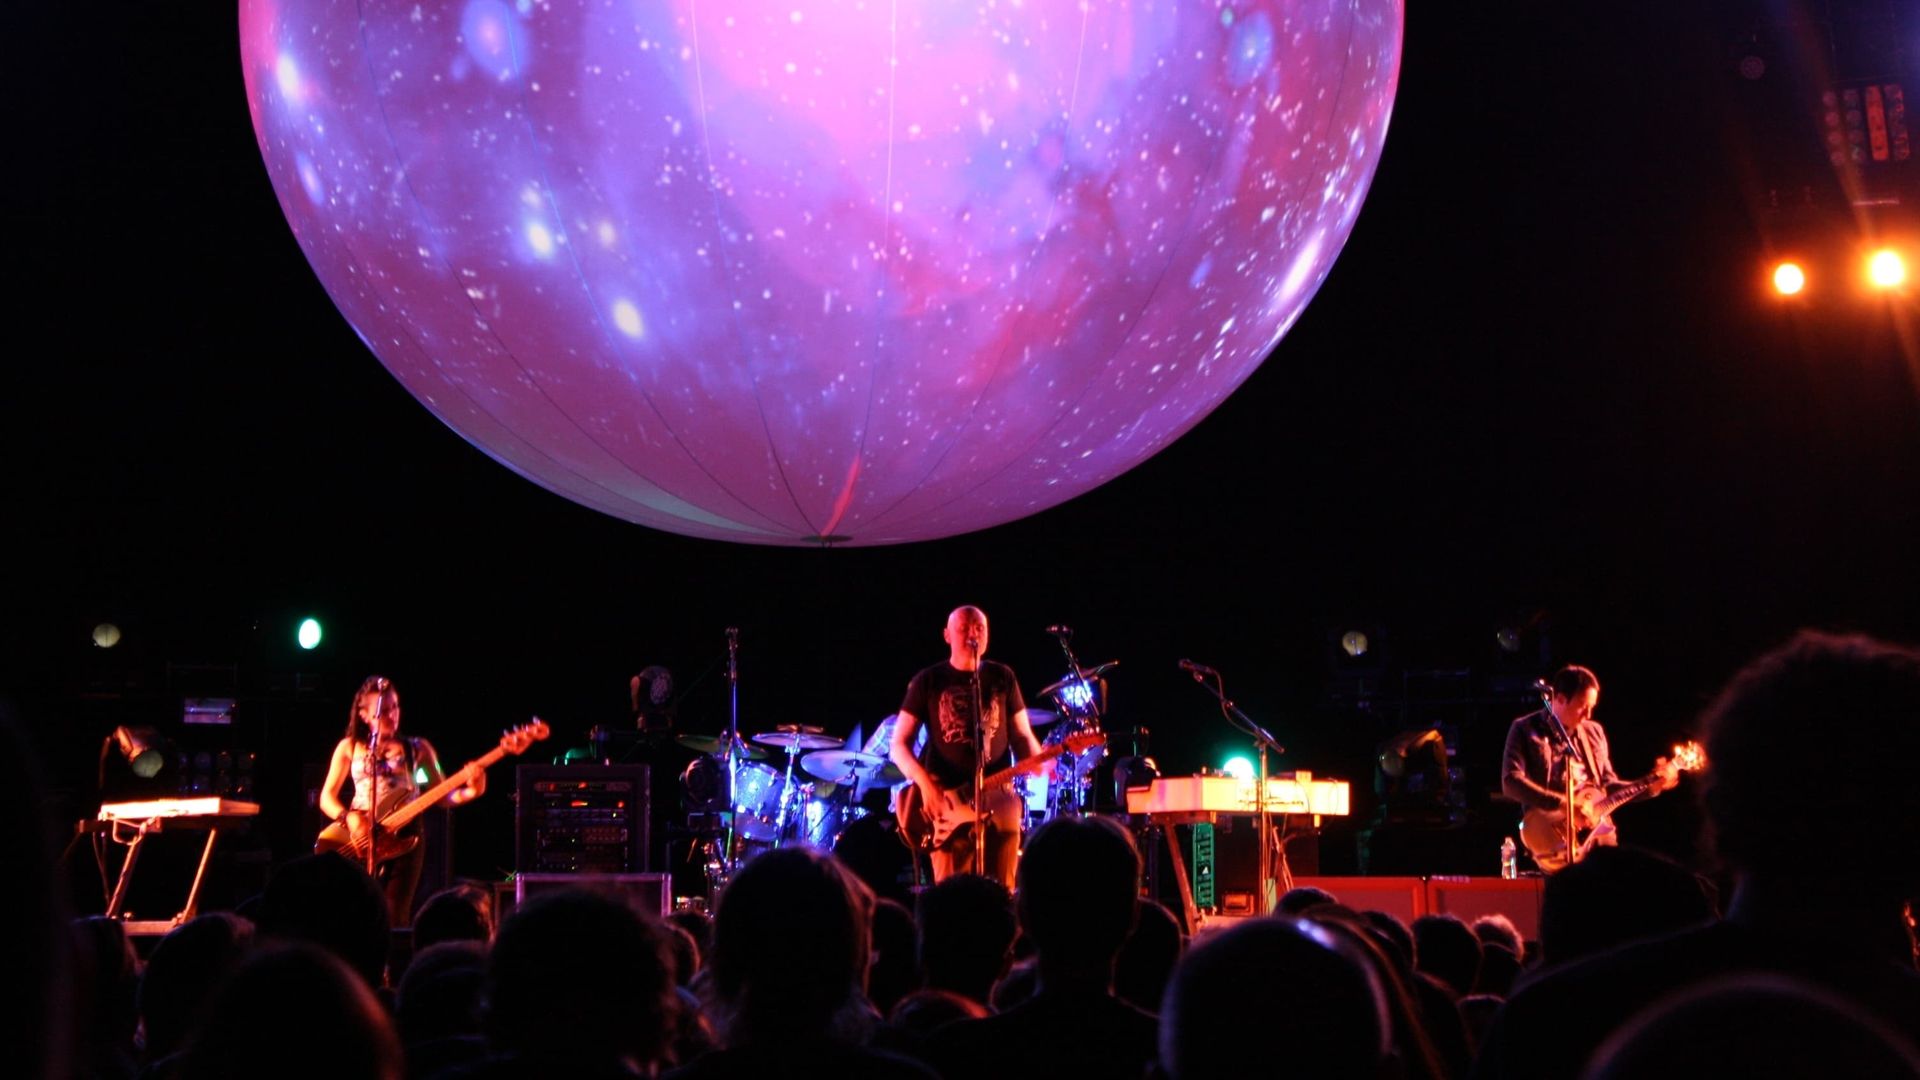 The Smashing Pumpkins: Oceania 3D Live in NYC background